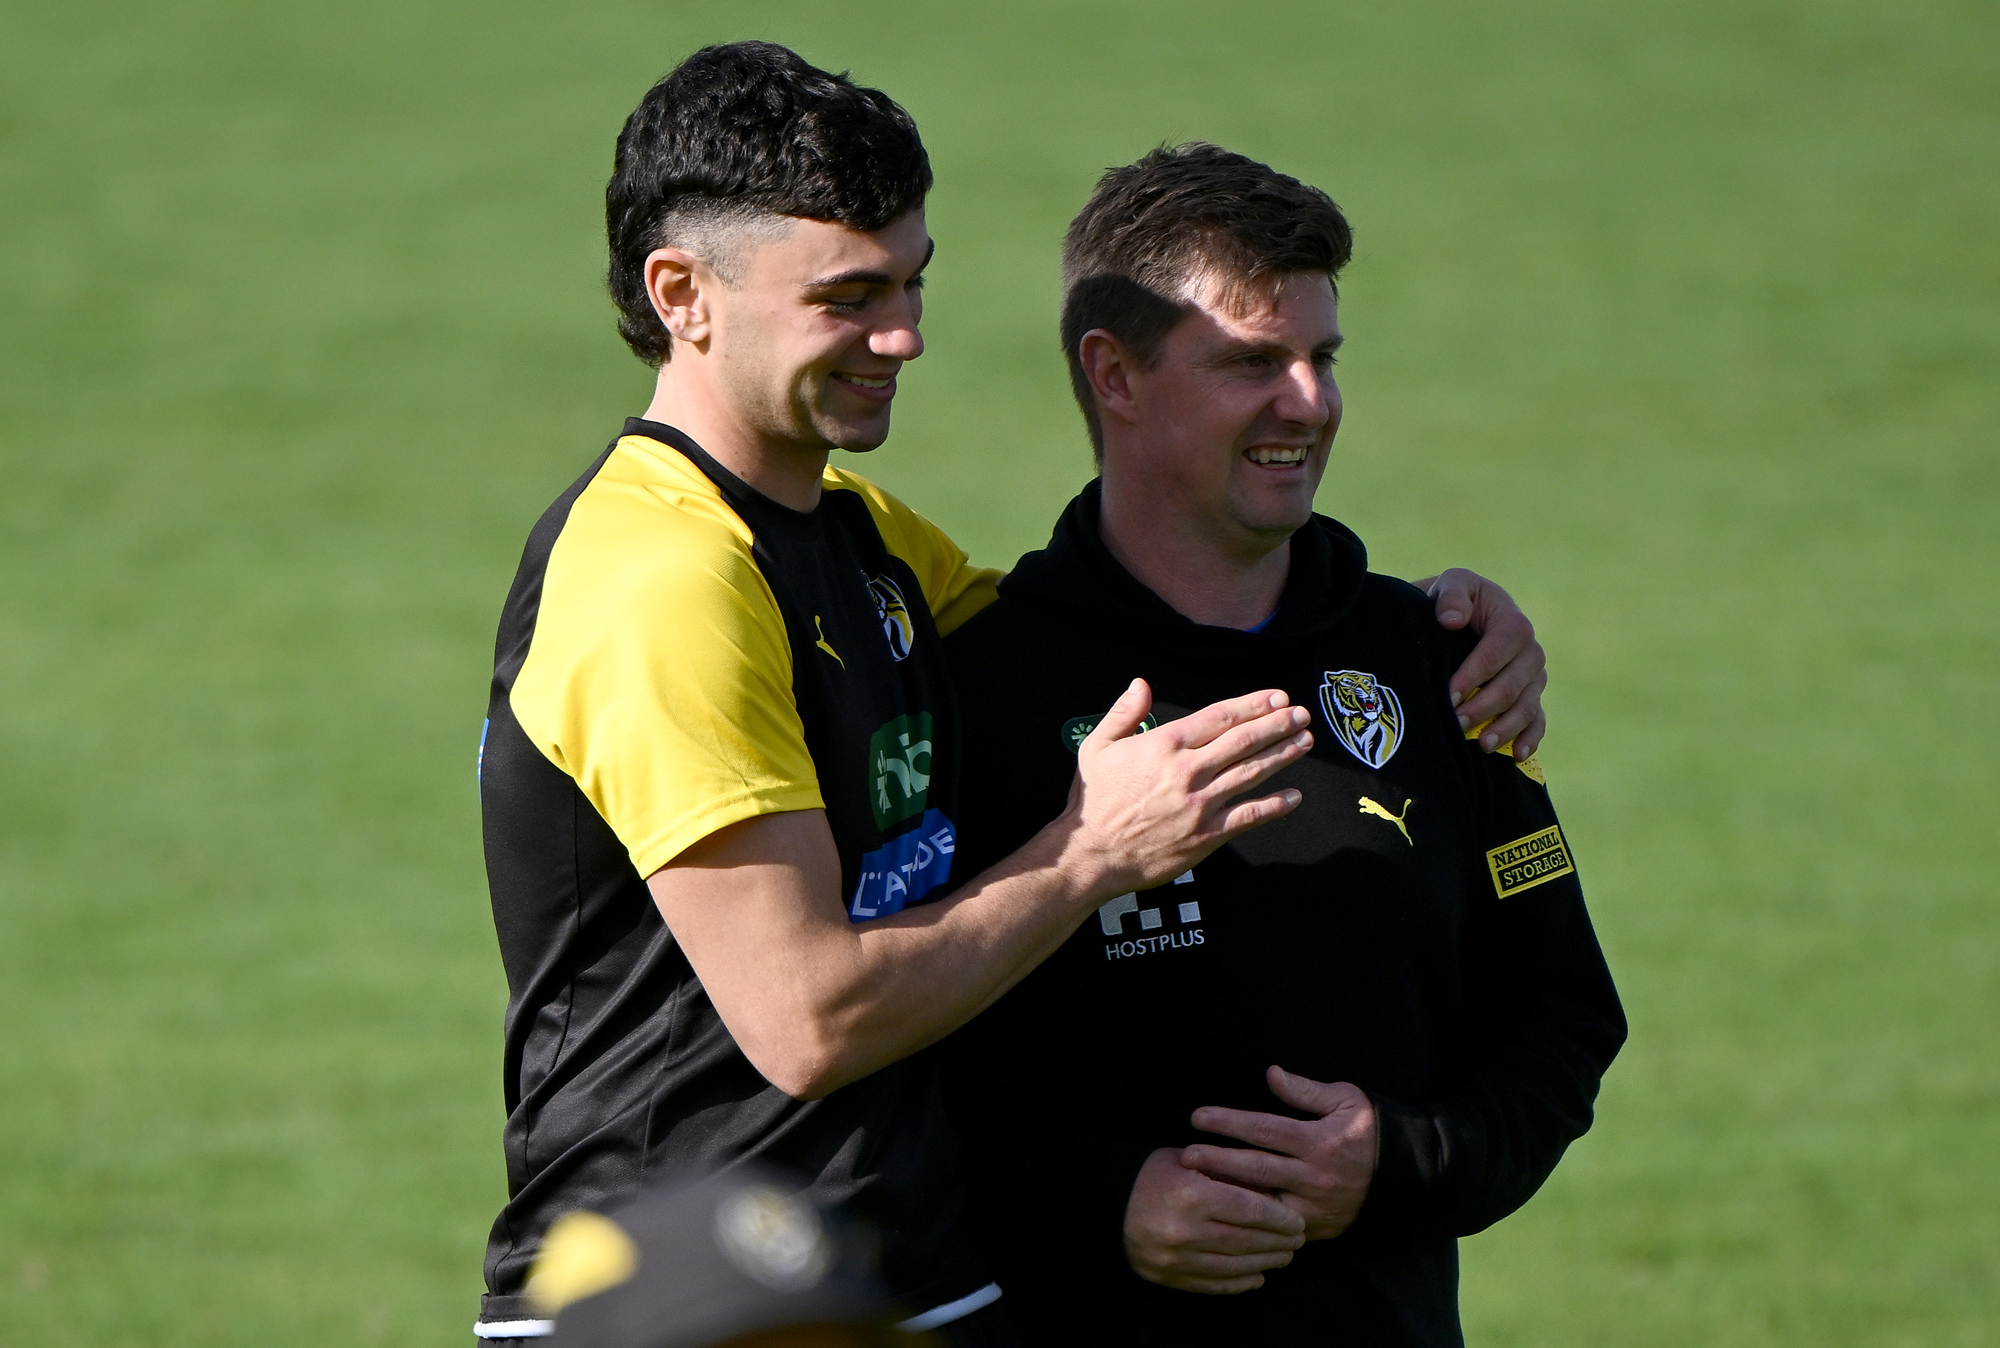 Two man stand next to each other on a field wearing yellow and black.